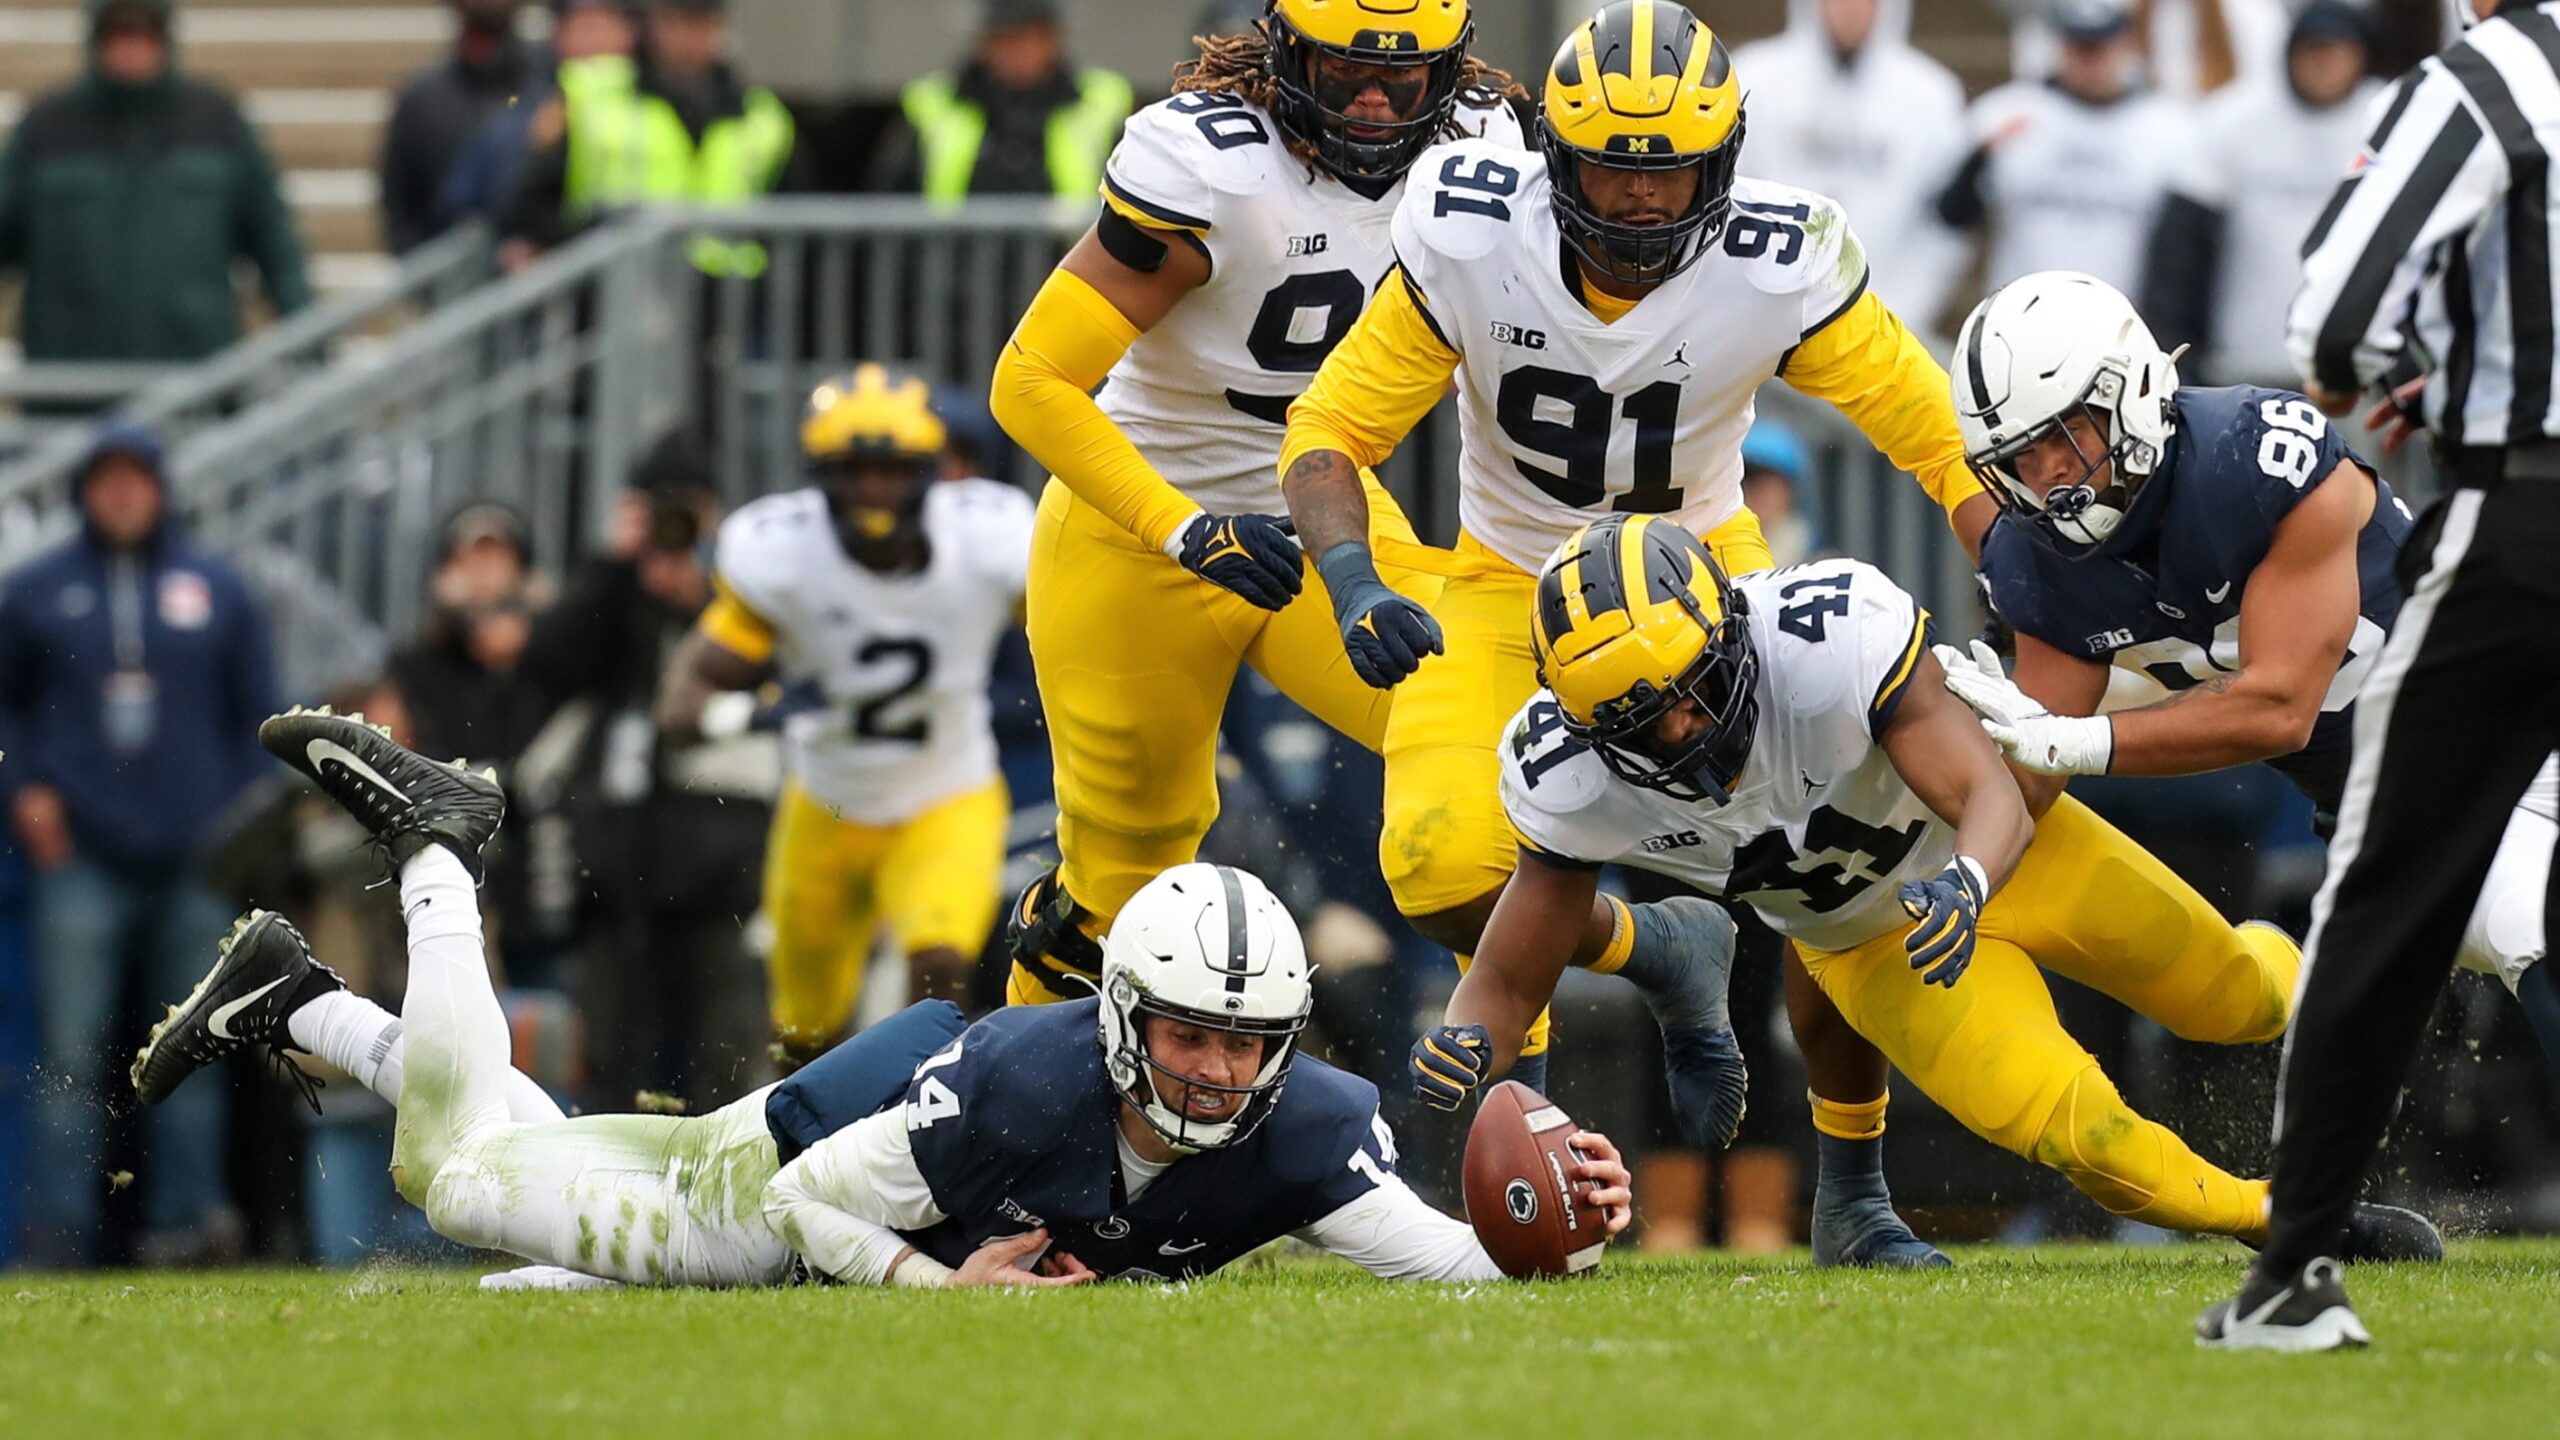 Michigan football looks to recover a Penn State fumble. James Franklin and Kalen King.